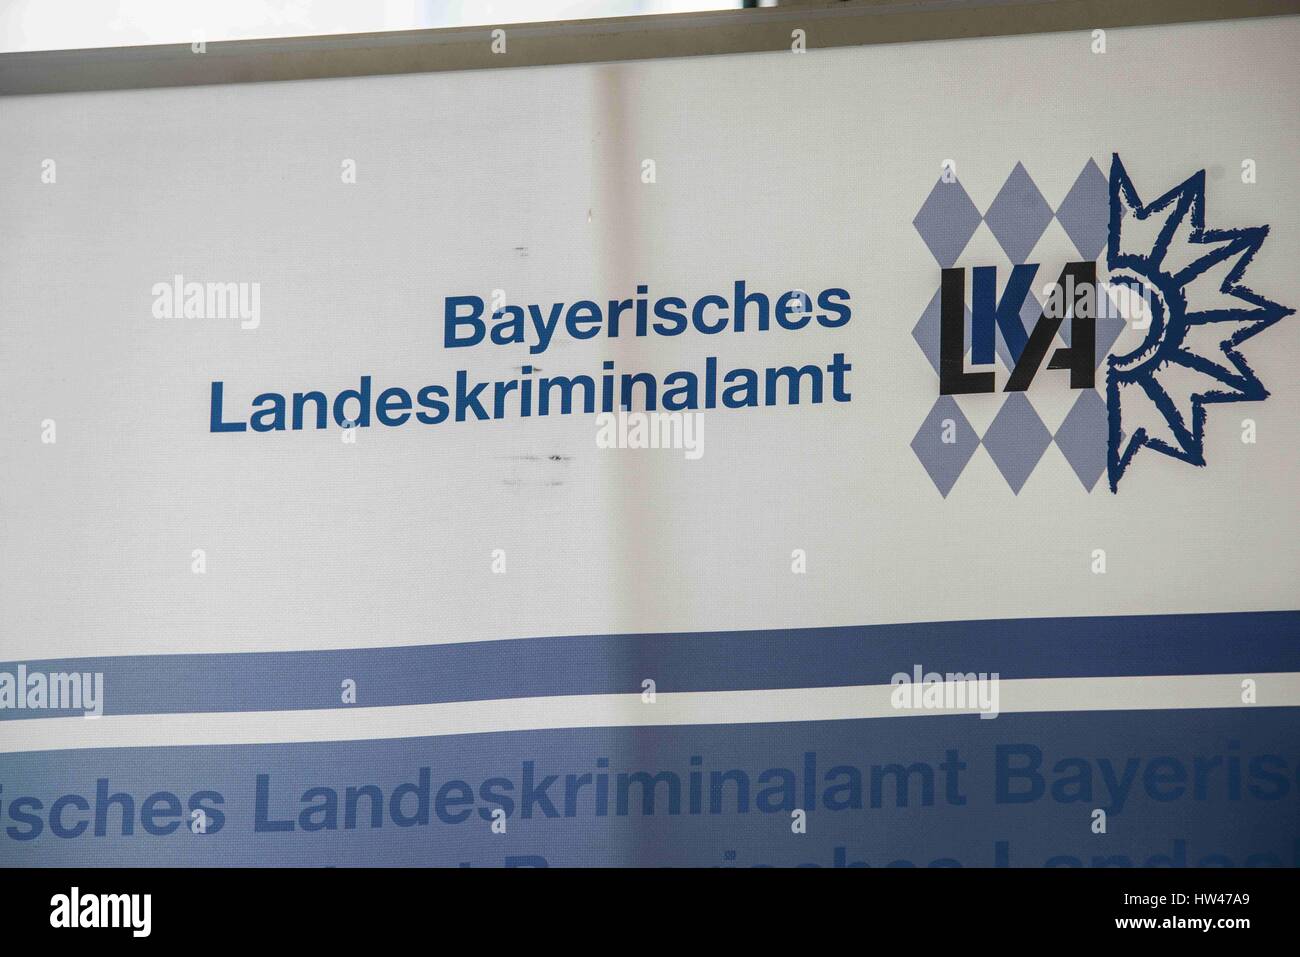 March 17, 2017 - Munich, bavaria, Germany - The Landeskriminalamt (state crime office) of Bavaria held a press conference to signify the conclusion of the investigation around the July 22 Amoklauf (shooting) at the OEZ Olympia Shopping Mall by Ali David Sonboly, a disturbed 18 year old. Sonboly was under mental health care prior to the shooting and then obtained a gun via the Darkweb. Further evidence from numerous sources revealed that he also had far-right leanings and was a follower of Germany's Alternativ fuer Deutschland (AfD) party. Sonboly killed nine, injured thirty-six before ki Stock Photo